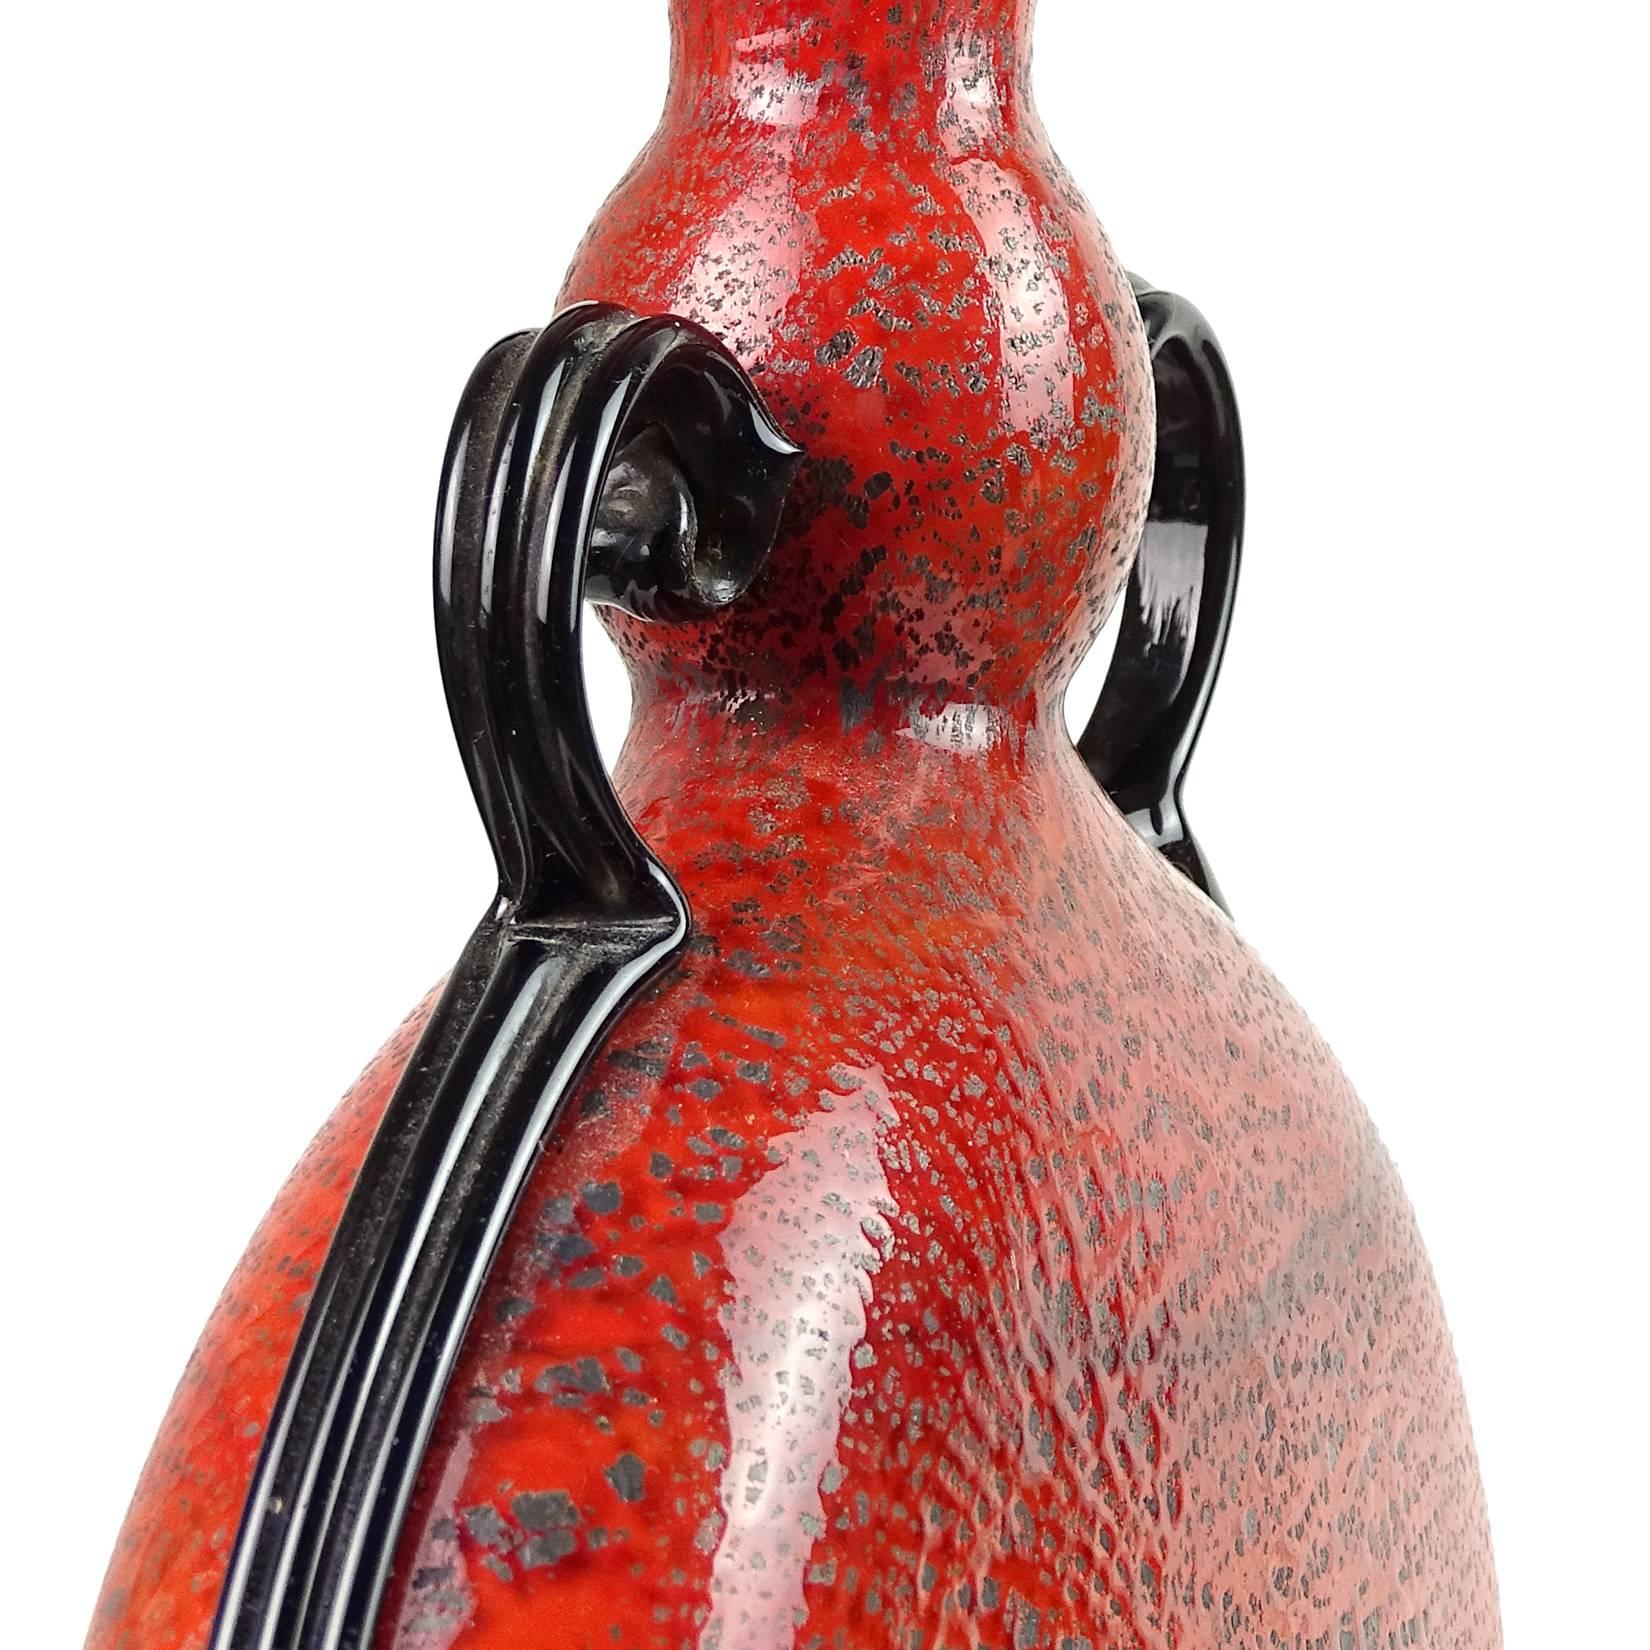 Very rare and large, Murano hand blown bright red, silver leaf and black accents Italian art glass vase. Documented to designer Napoleone Martinuzzi, circa 1932, Zecchin - Martinuzzi. Published (see last photo). Measures almost 12 1/2